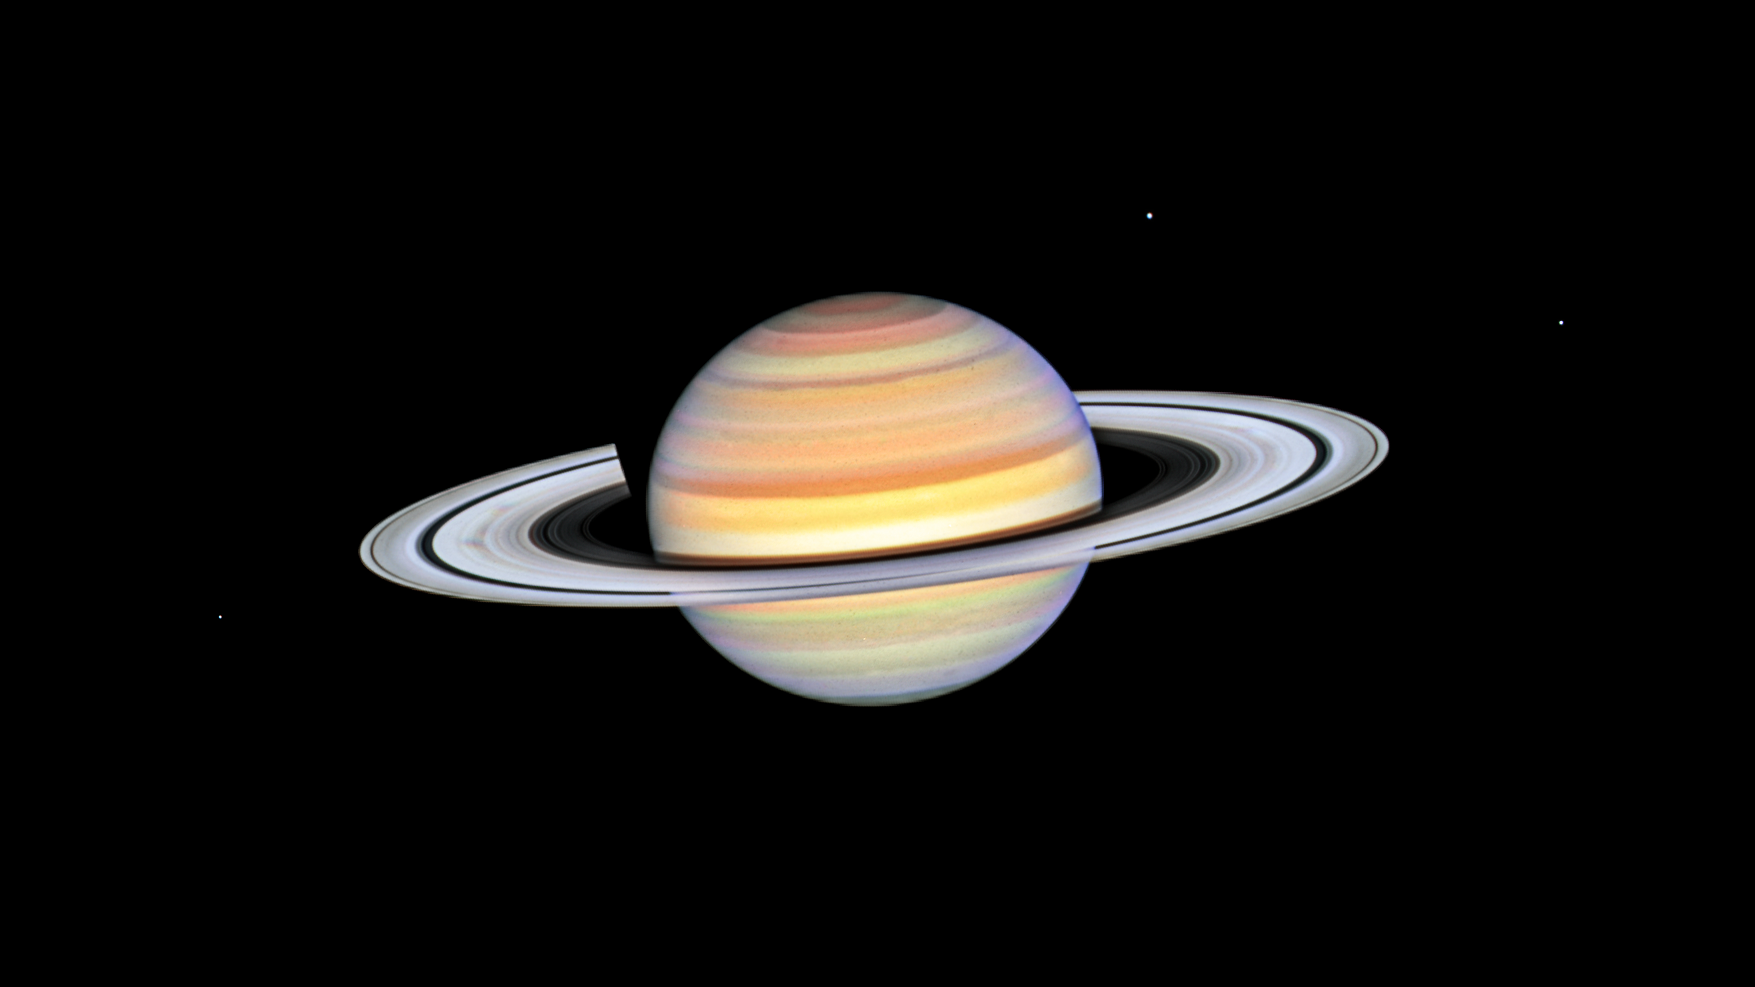 Colorful stripes in yellow, white, reddish-orange, pink, and green cover the planet. Saturn is tilted slightly toward us allowing the Sun to illuminate the top of its rings. The planet's shadow is cast toward the back and left of the planet. Saturn's moons Dione, and Enceladus are visible to its upper right, while its moon Mimas is just below and to the left of the planet's rings.